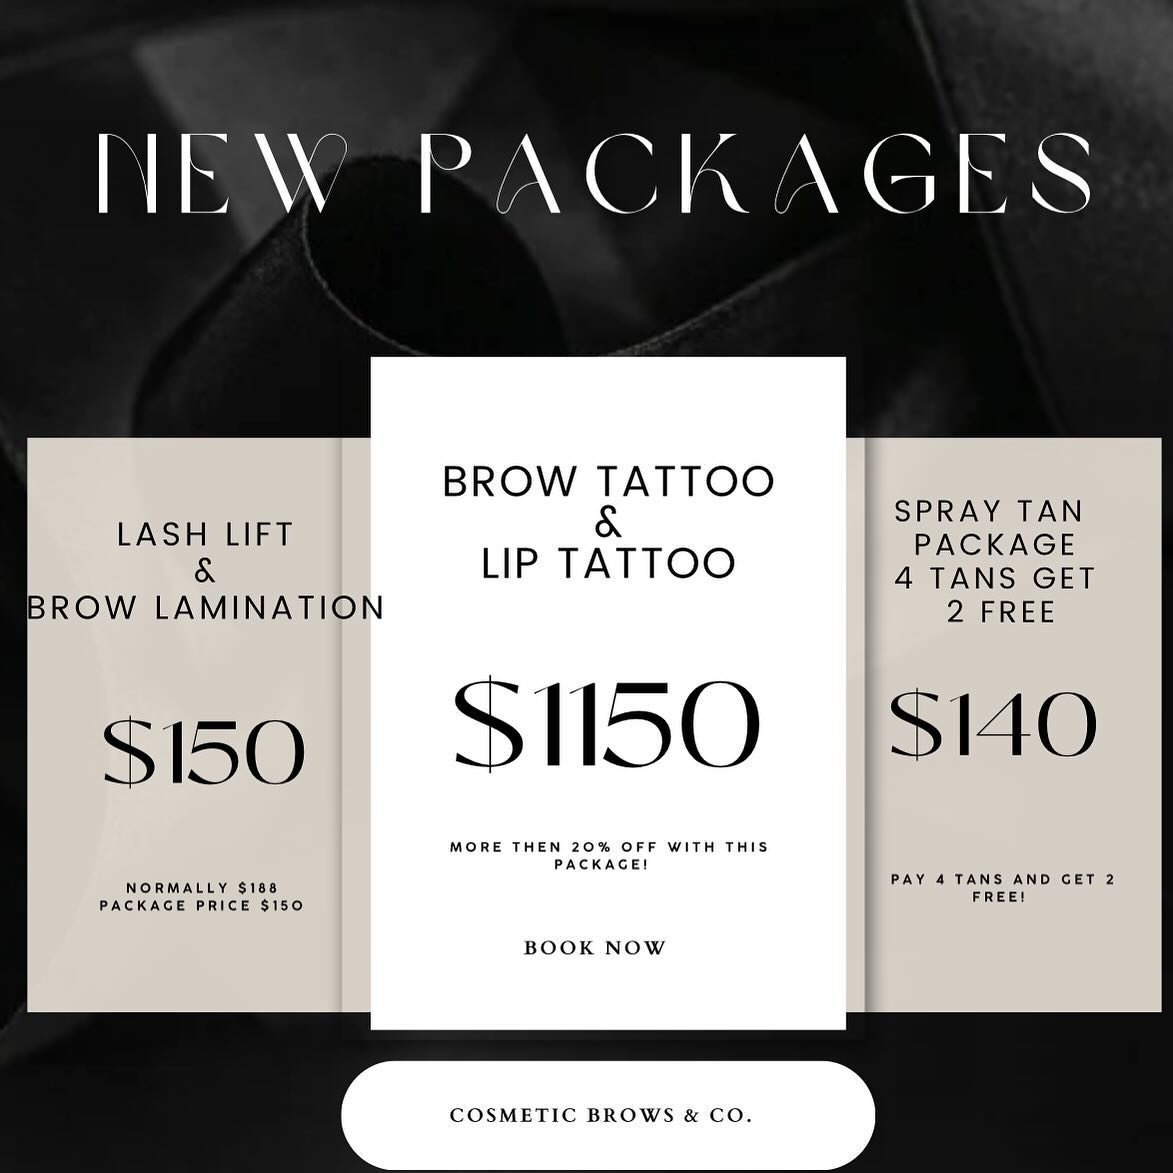 ✨ SAVE WITH PACKAGES ✨

✨ Package - 1 Brow Tattoo and Full Lip tattoo saving more then 20%
✨ Package 2 - Lash Lift &amp; Tint + Brow Lamination saving 20% 
✨ 6 Spray Tans pay for 4 get 2 FREE 

DM us for more information. 
T&amp;C Apply 

Have a wond